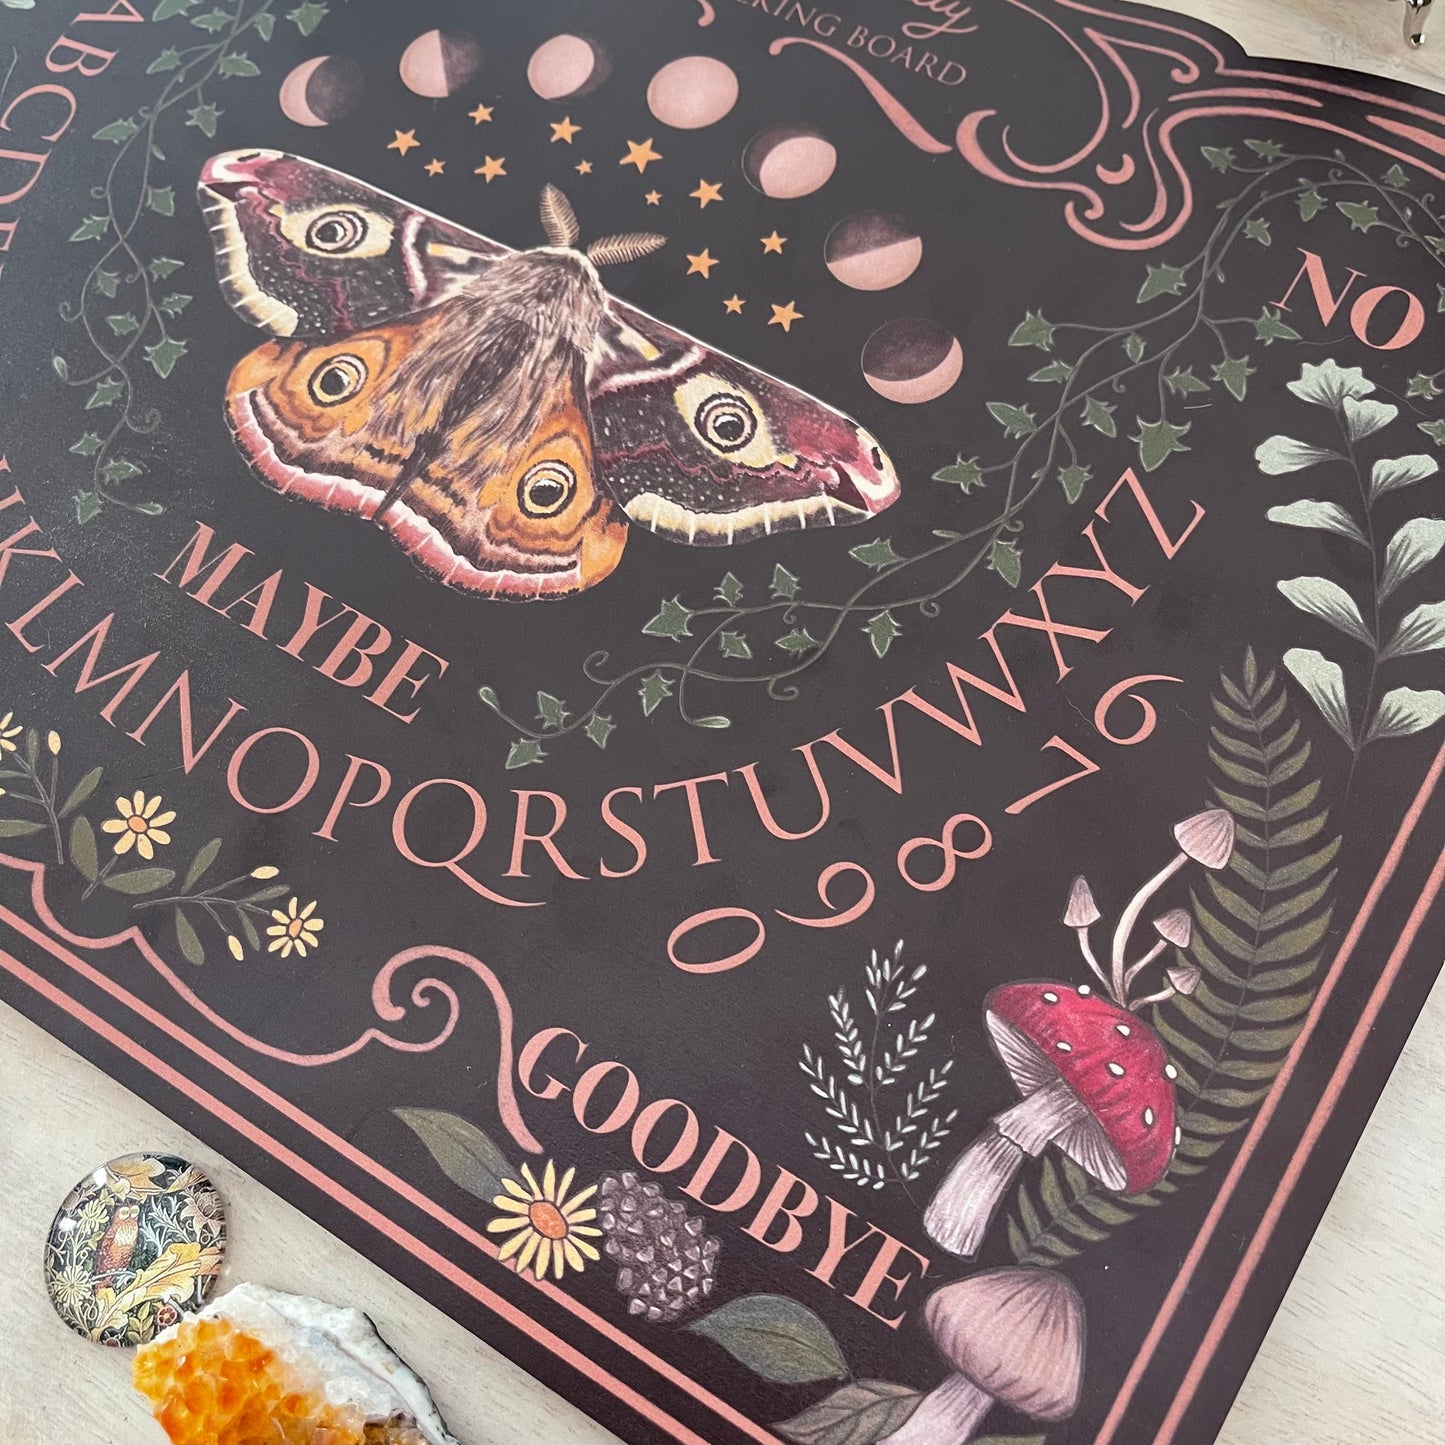 Beginners Witchcraft Beautiful hand-drawn dark moth and mushroom ouija board for sale spirit board for witchcraft